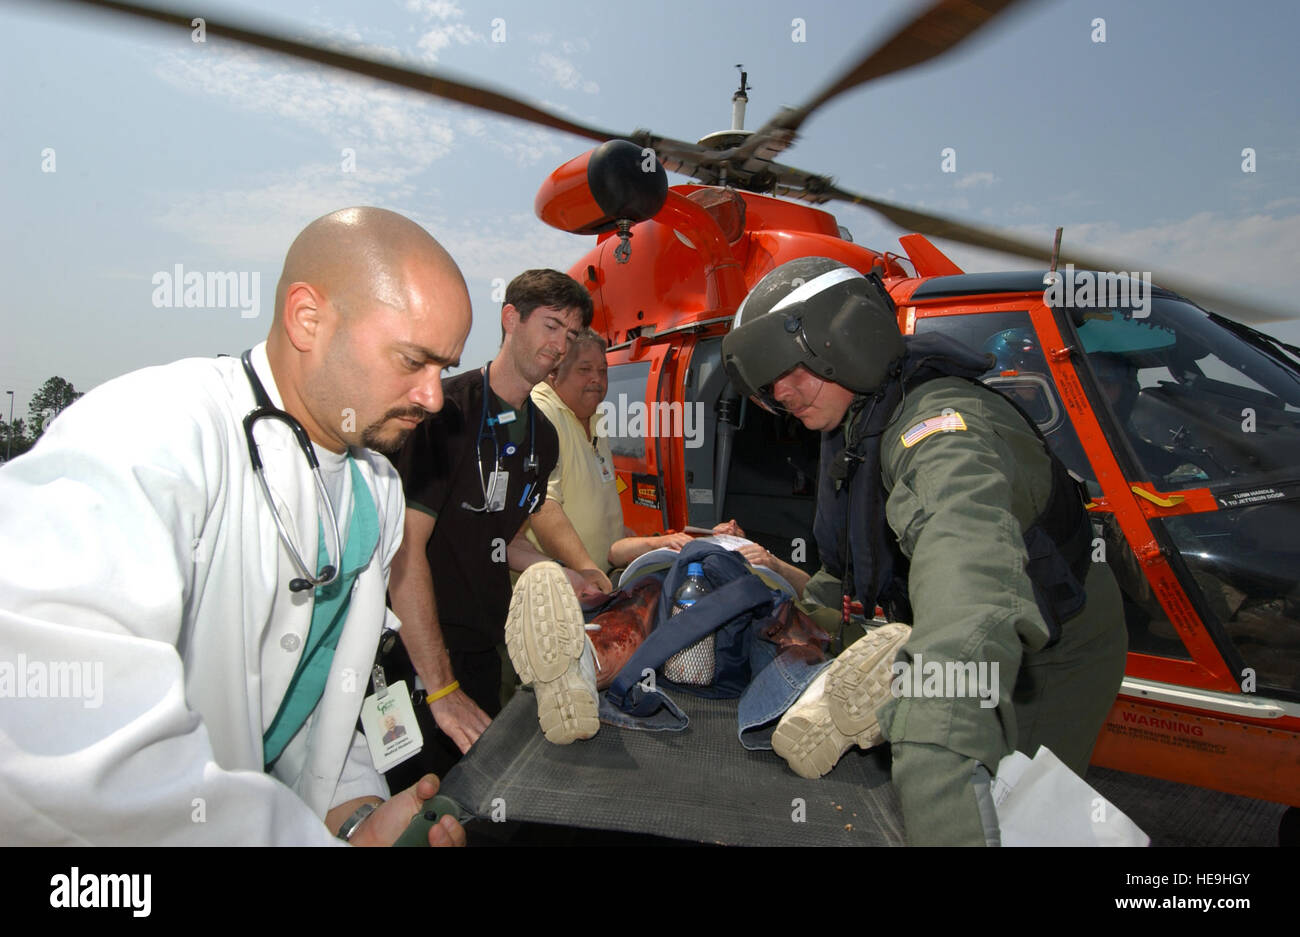 050524-F-5586B-129  Hospital personnel offload an simulated patient on a stretcher from a U.S. Coast Guard HH-65 Dolphin helicopter at Garden Park Medical Center in Gulfport, Miss., on May 24, 2005, during Exercise Lifesaver 2005.  The exercise is a Homeland Security/National Disaster Medical System exercise being conducted in eight states, coordinating efforts between military, local, state and federal agencies.  The exercise scenario is based on an oil refinery explosion involving more than 200 patients.   Master Sgt. James M. Bowman, U.S. Air Force. (Released) Stock Photo